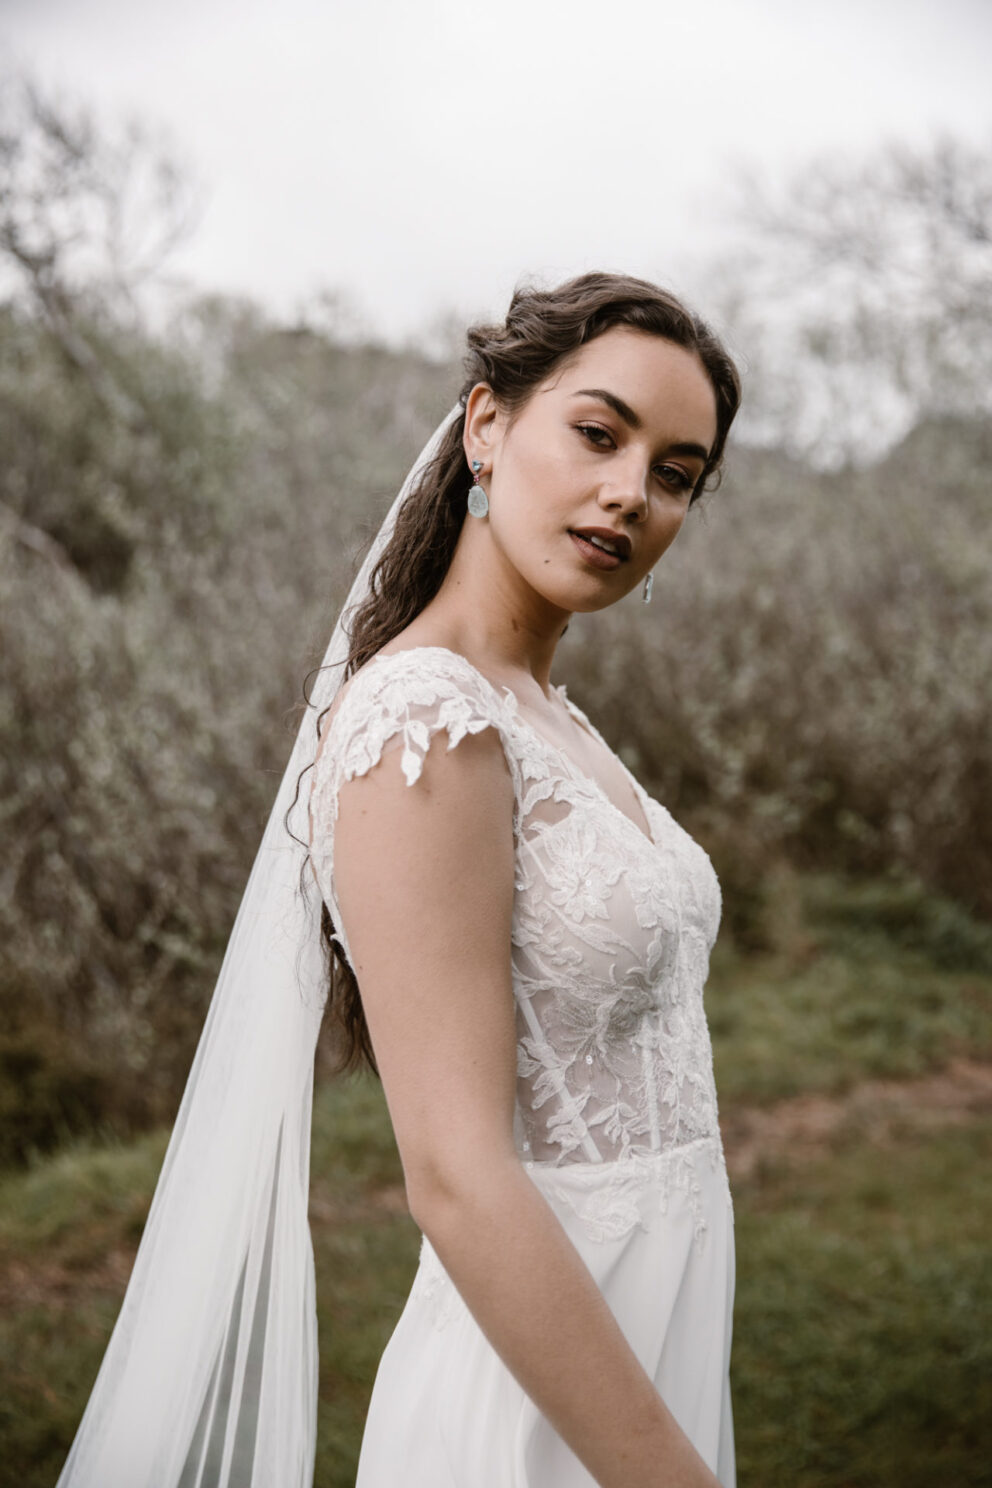 Our Jiana veil is everything you need on your wedding day, floral lace graces this 2.75M tulle veil and adds a touch of elegance as you walk down the aisle.